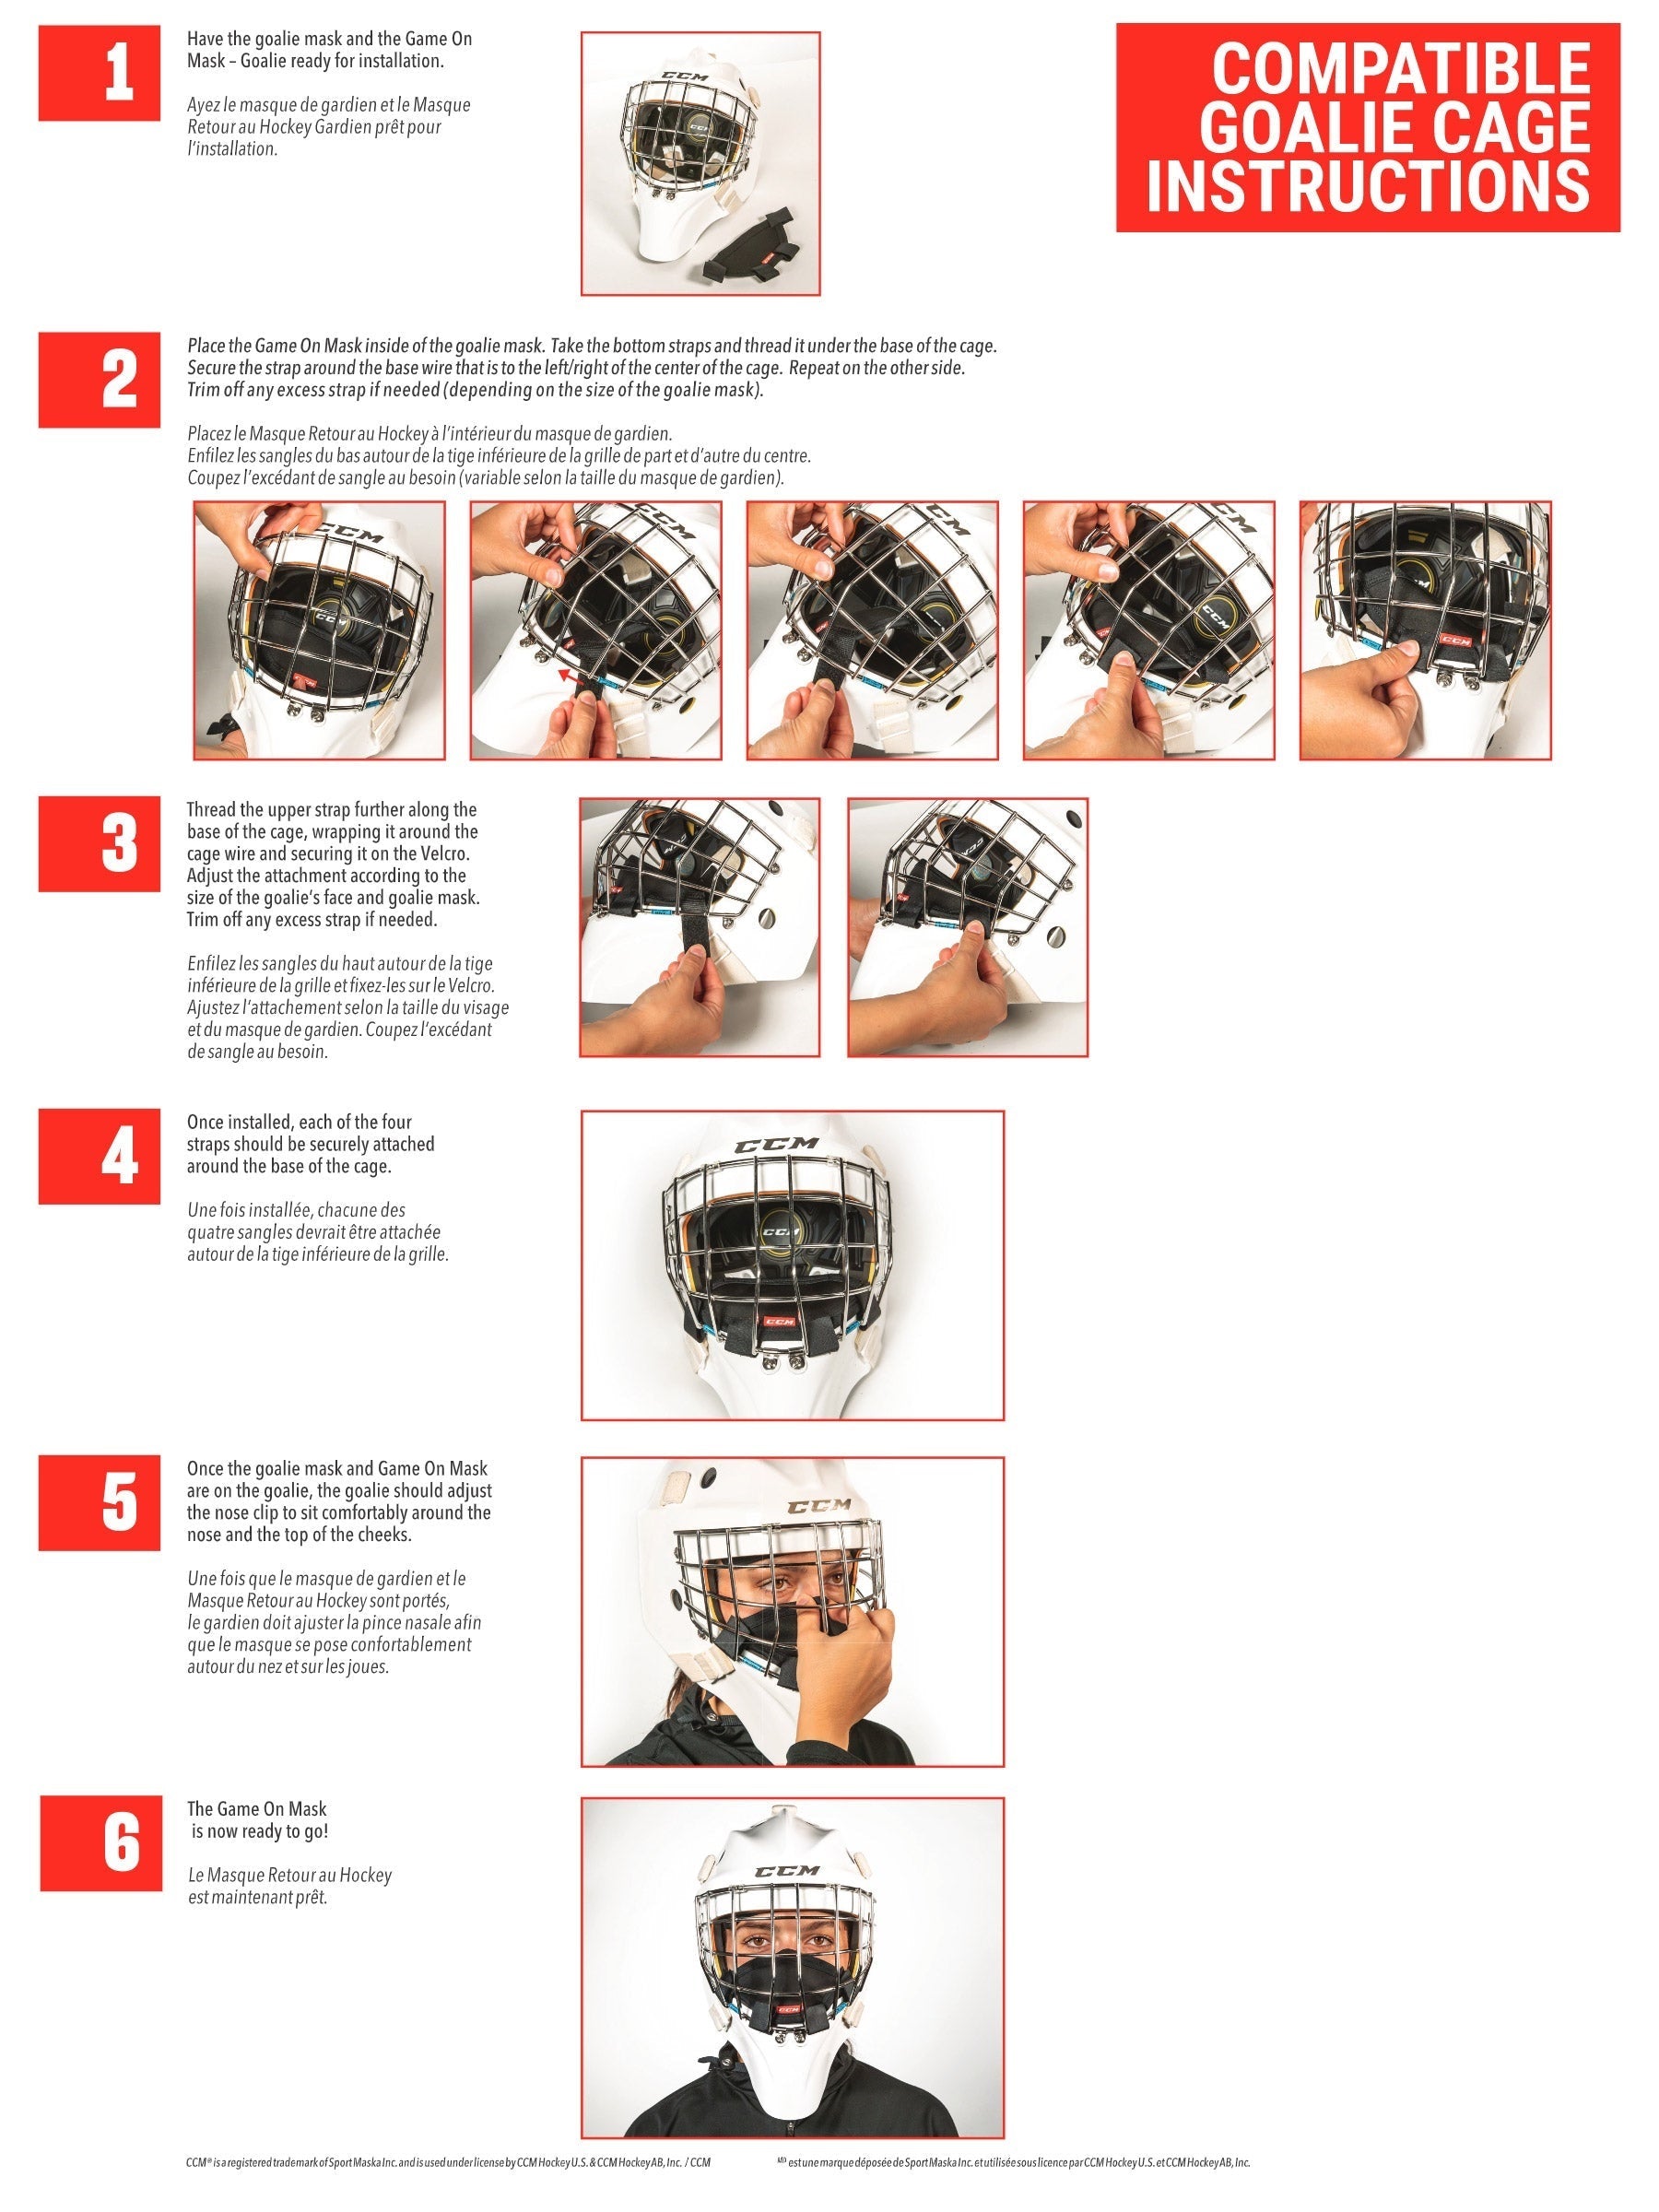 covid-mask-for-hockey-goalies-that-attaches-to-cage